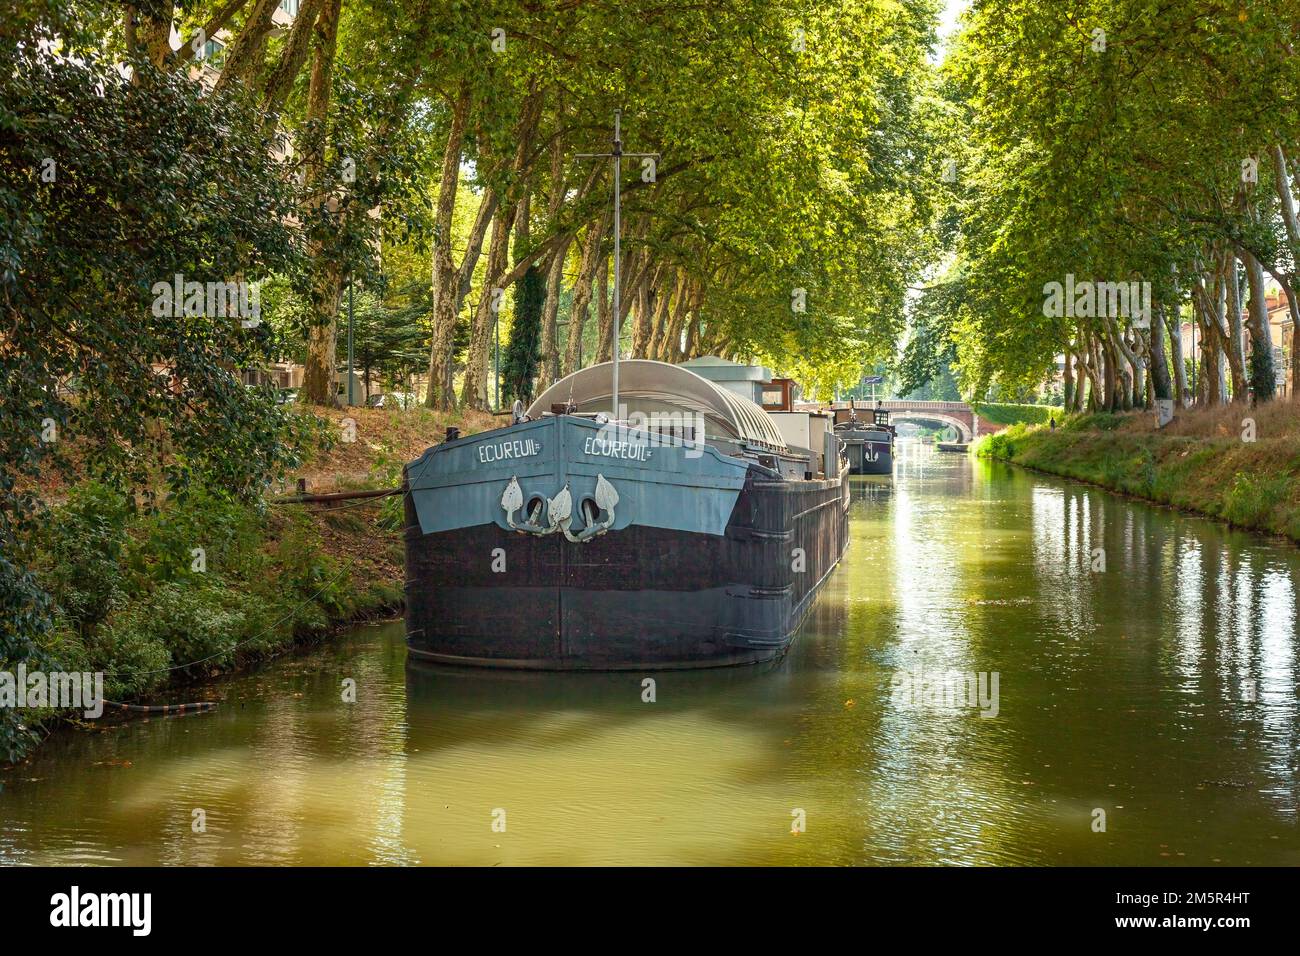 Tourism boat on the Canal du Midi, Southern France near Toulouse Stock Photo